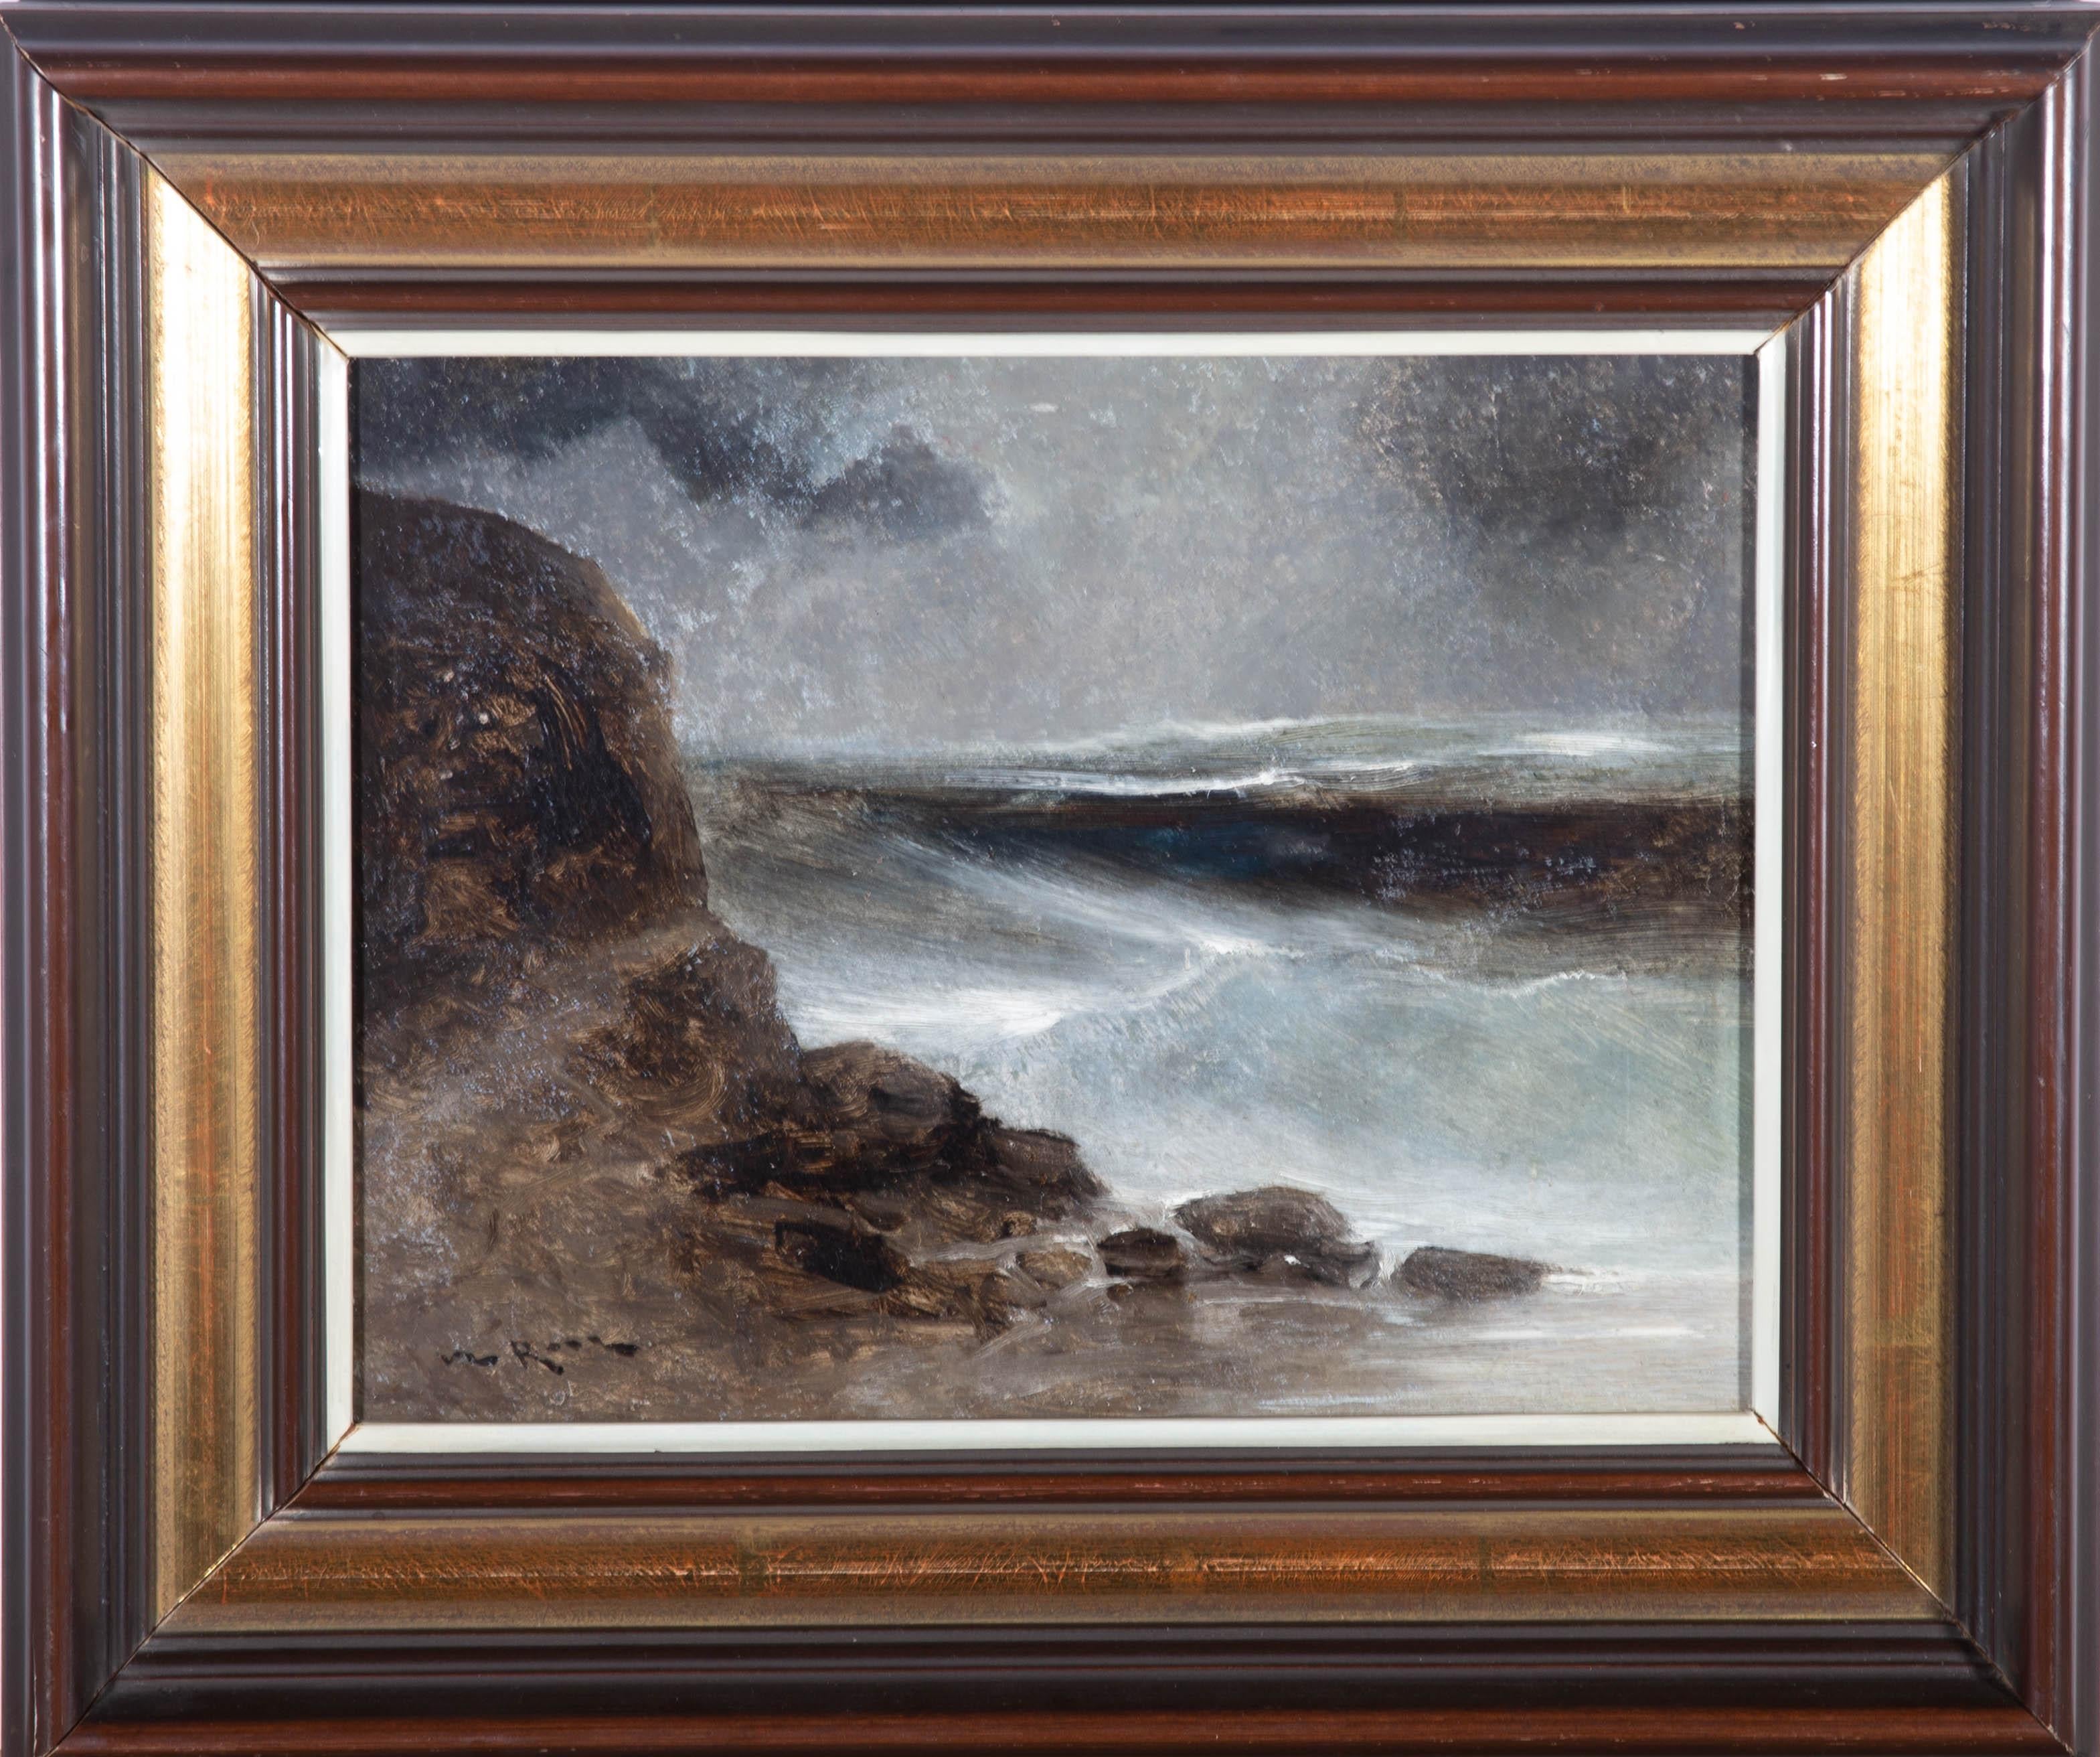 Depicting choppy waves hitting rocks on the shoreline. This dark, atmospheric seascape captures the movement of the waves in heavy, expressive brushstrokes and a rich colour palette. The painting is signed Van Hier to the lower left and is very much